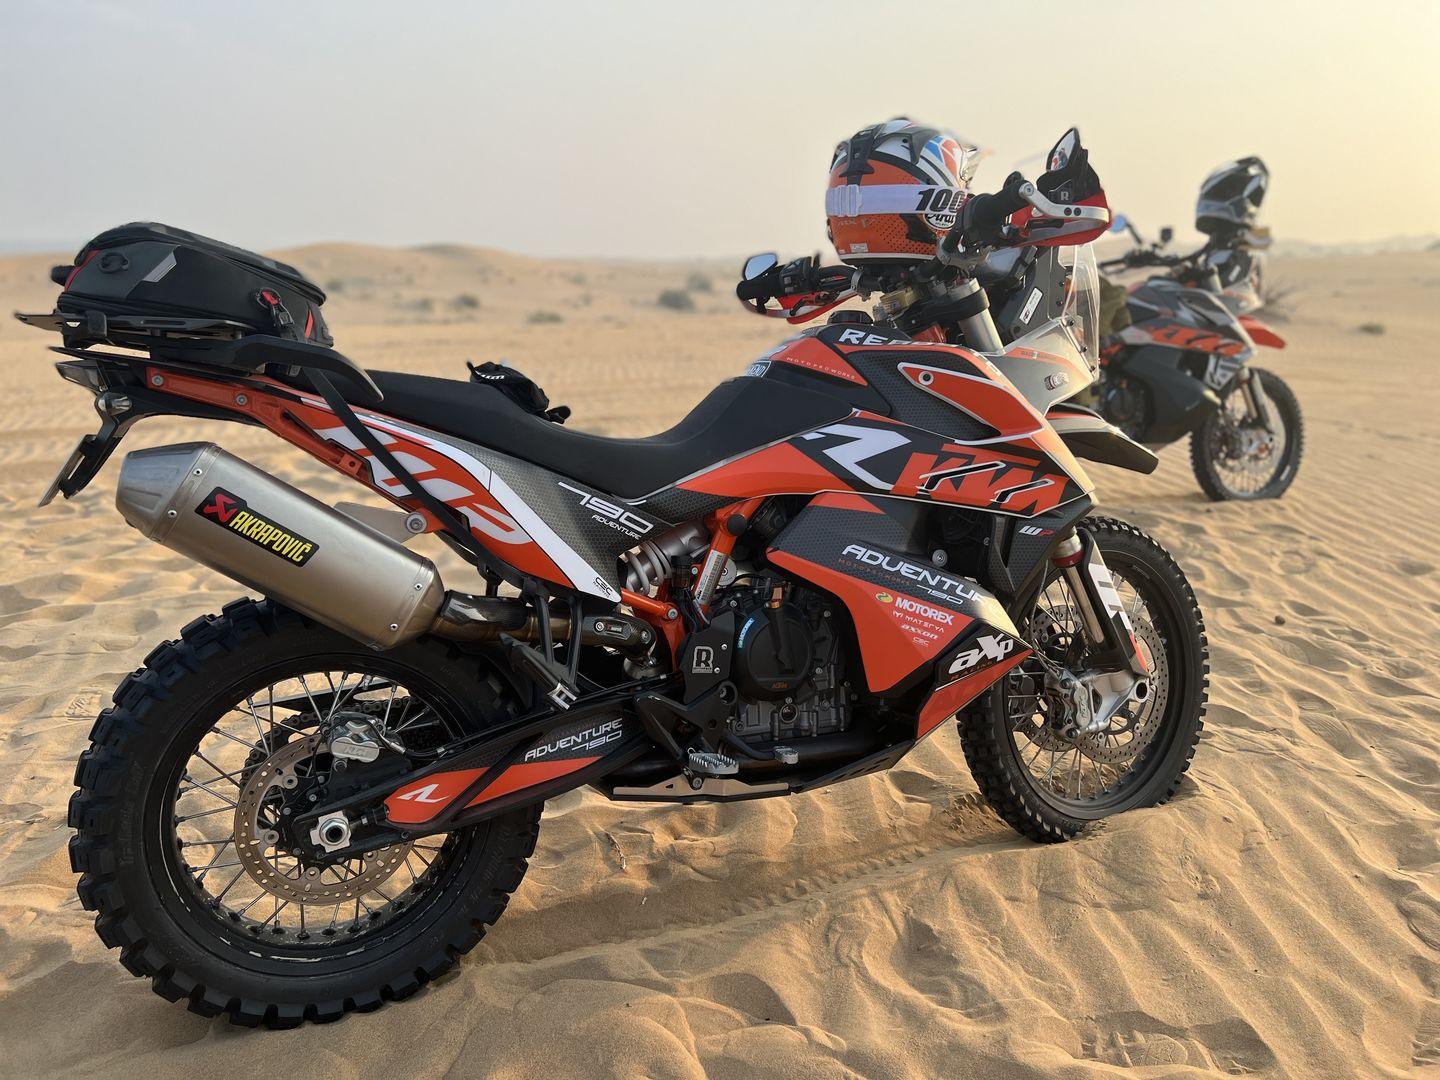 Touring the World on Two Wheels with KTM and Husqvarna